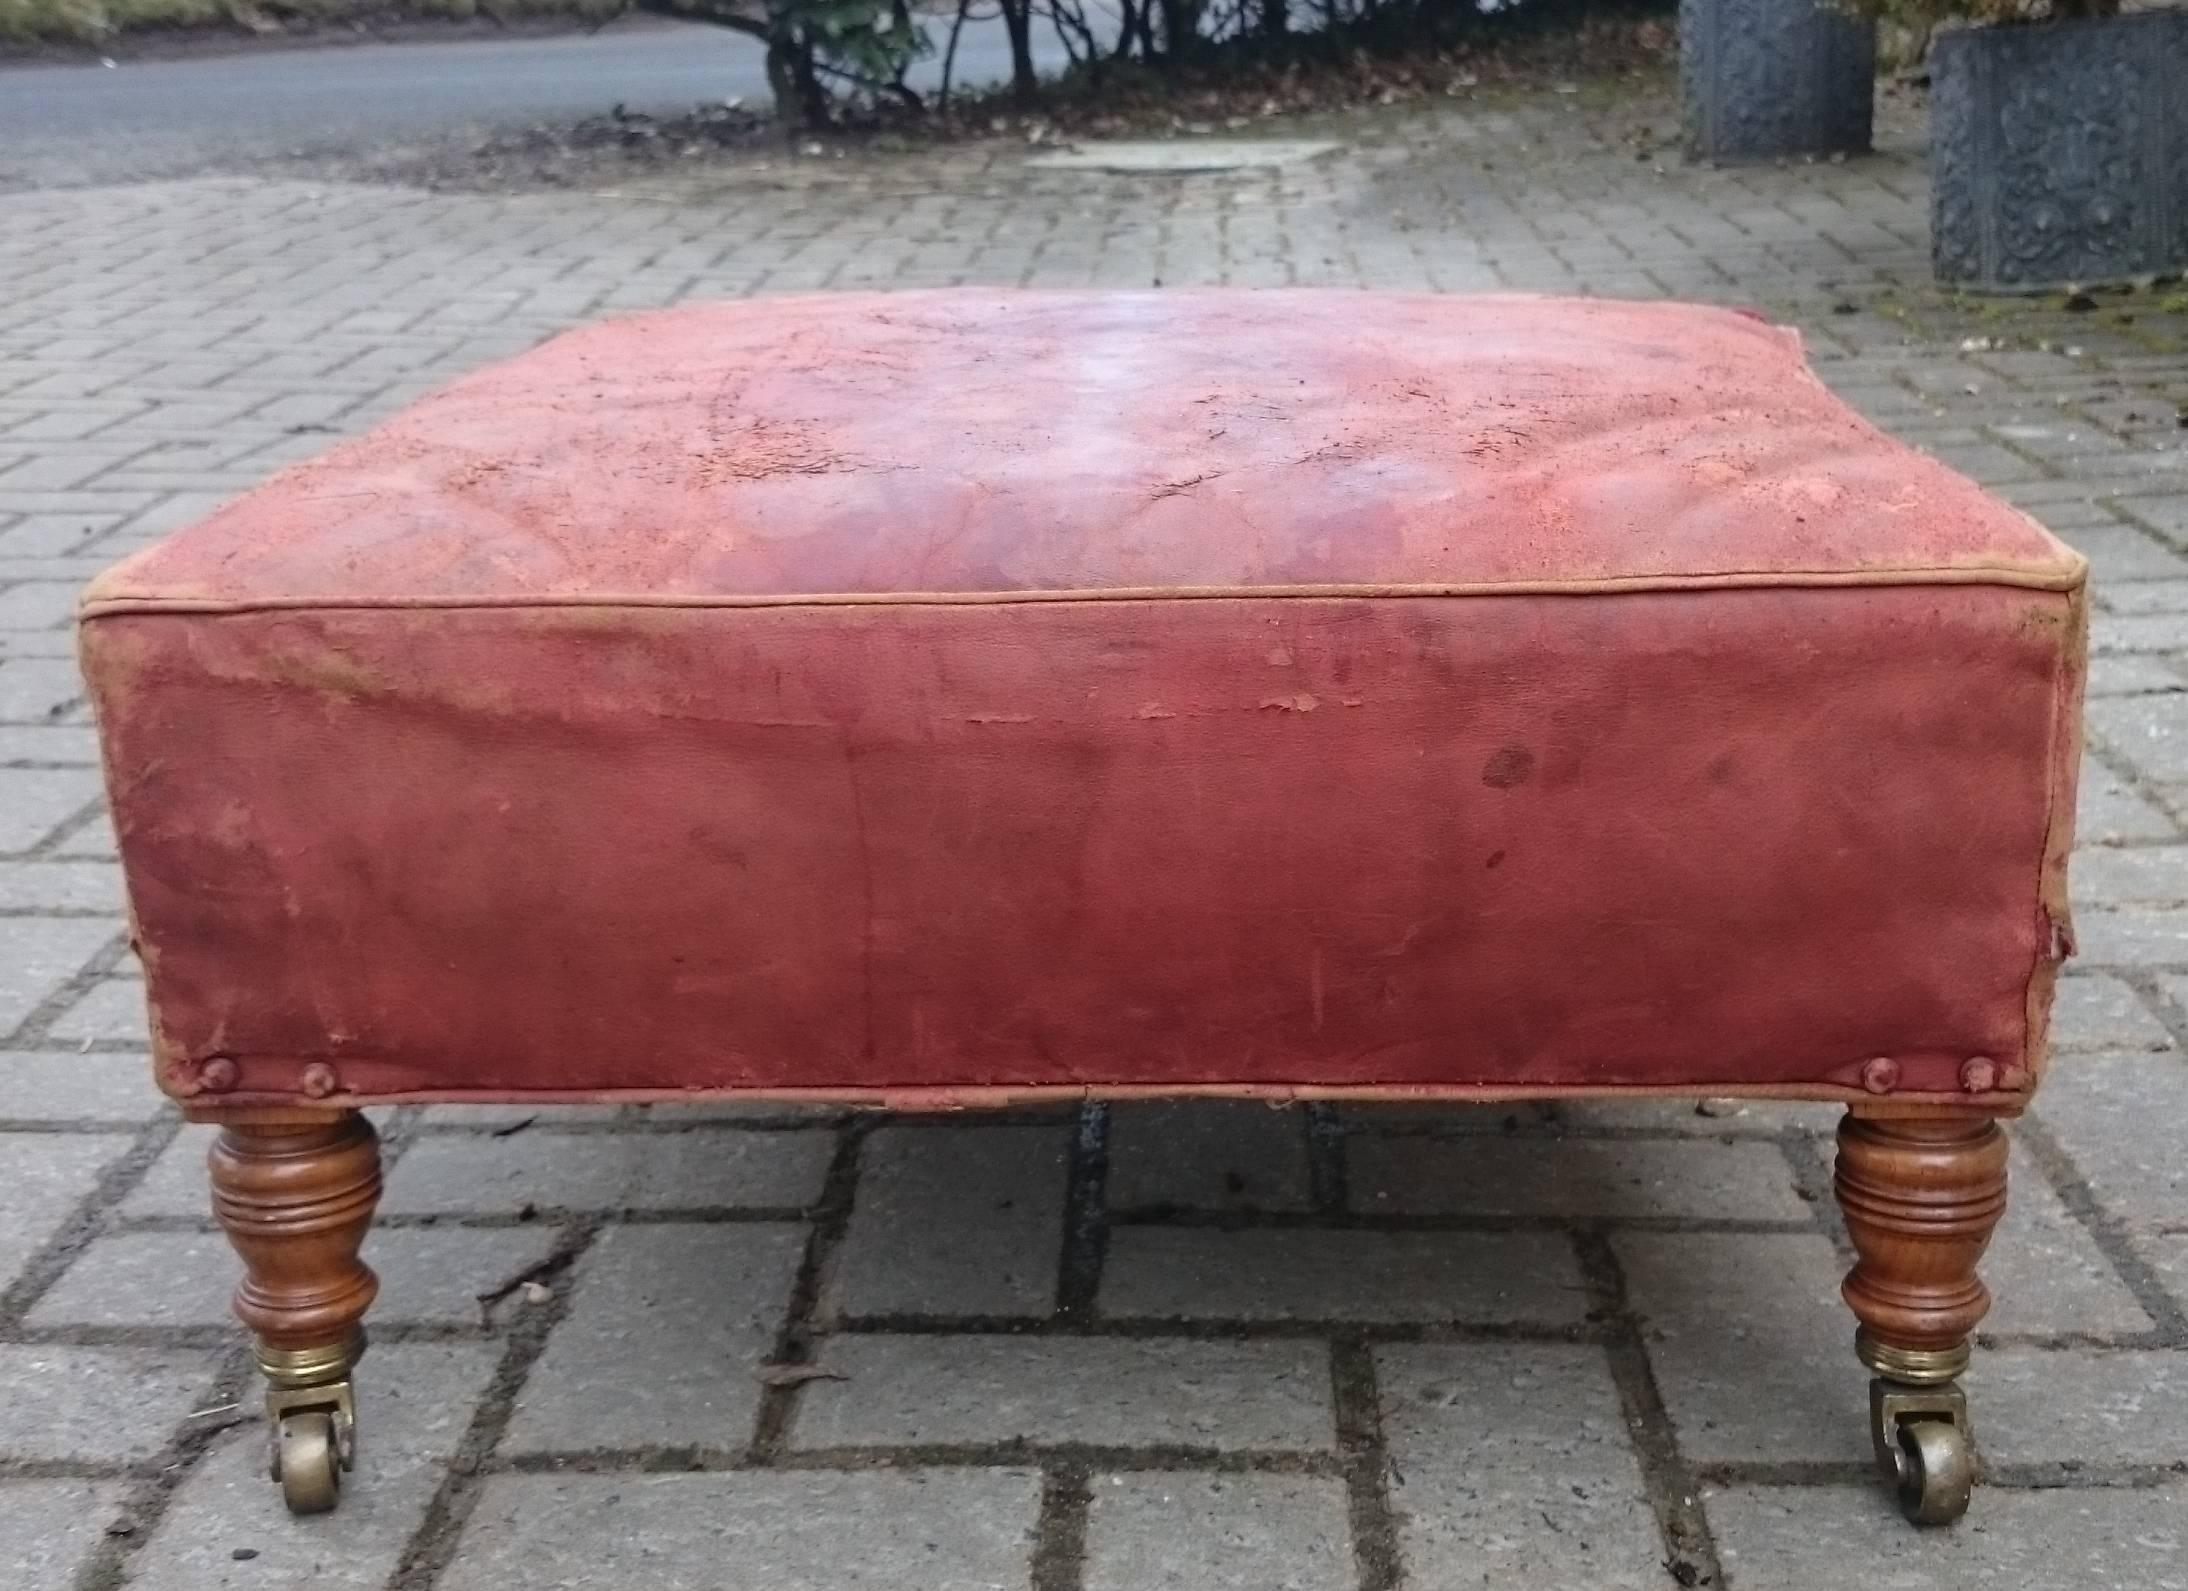 Upholstered footstool made by Howard and Sons of London standing on the turned legs typical of the company and upholstered in soft old red leather which might be the original. The casters are stamped and there is part of the original Howard label on